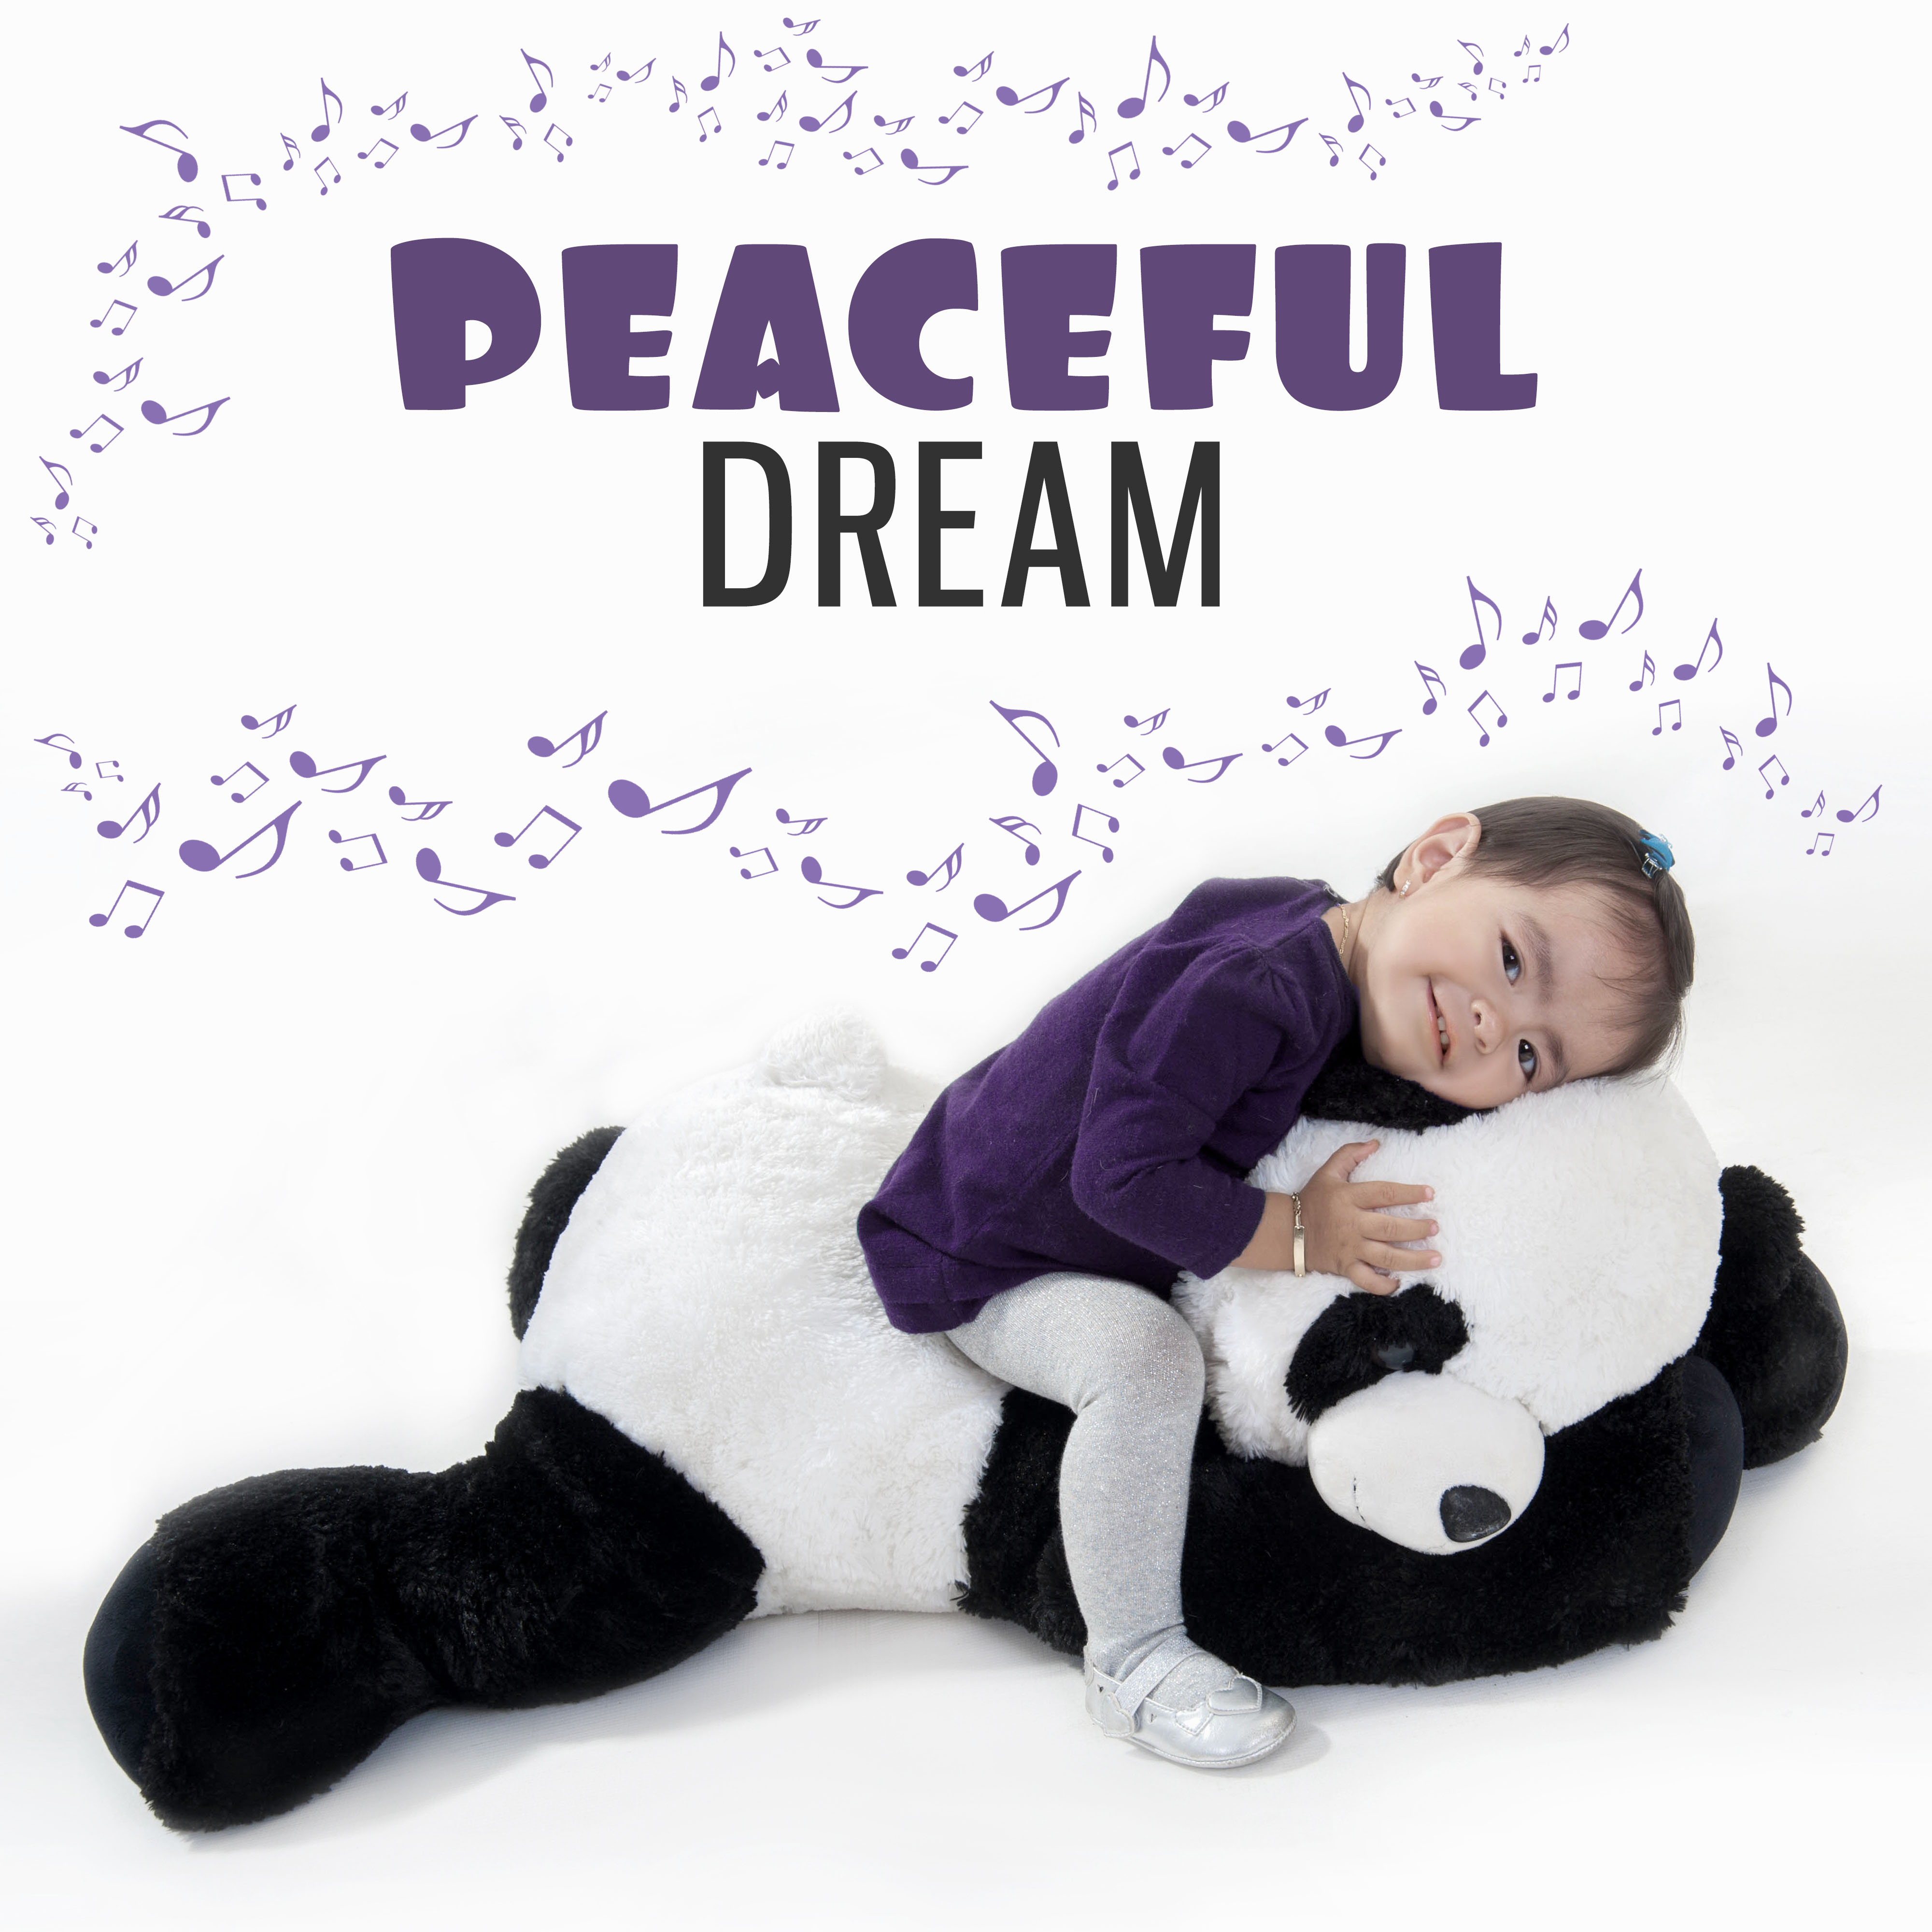 Peaceful Dream - Sounds for Toddlers, Baby Calm, Relaxation and Deep Sleep, Greatest Lullaby Song